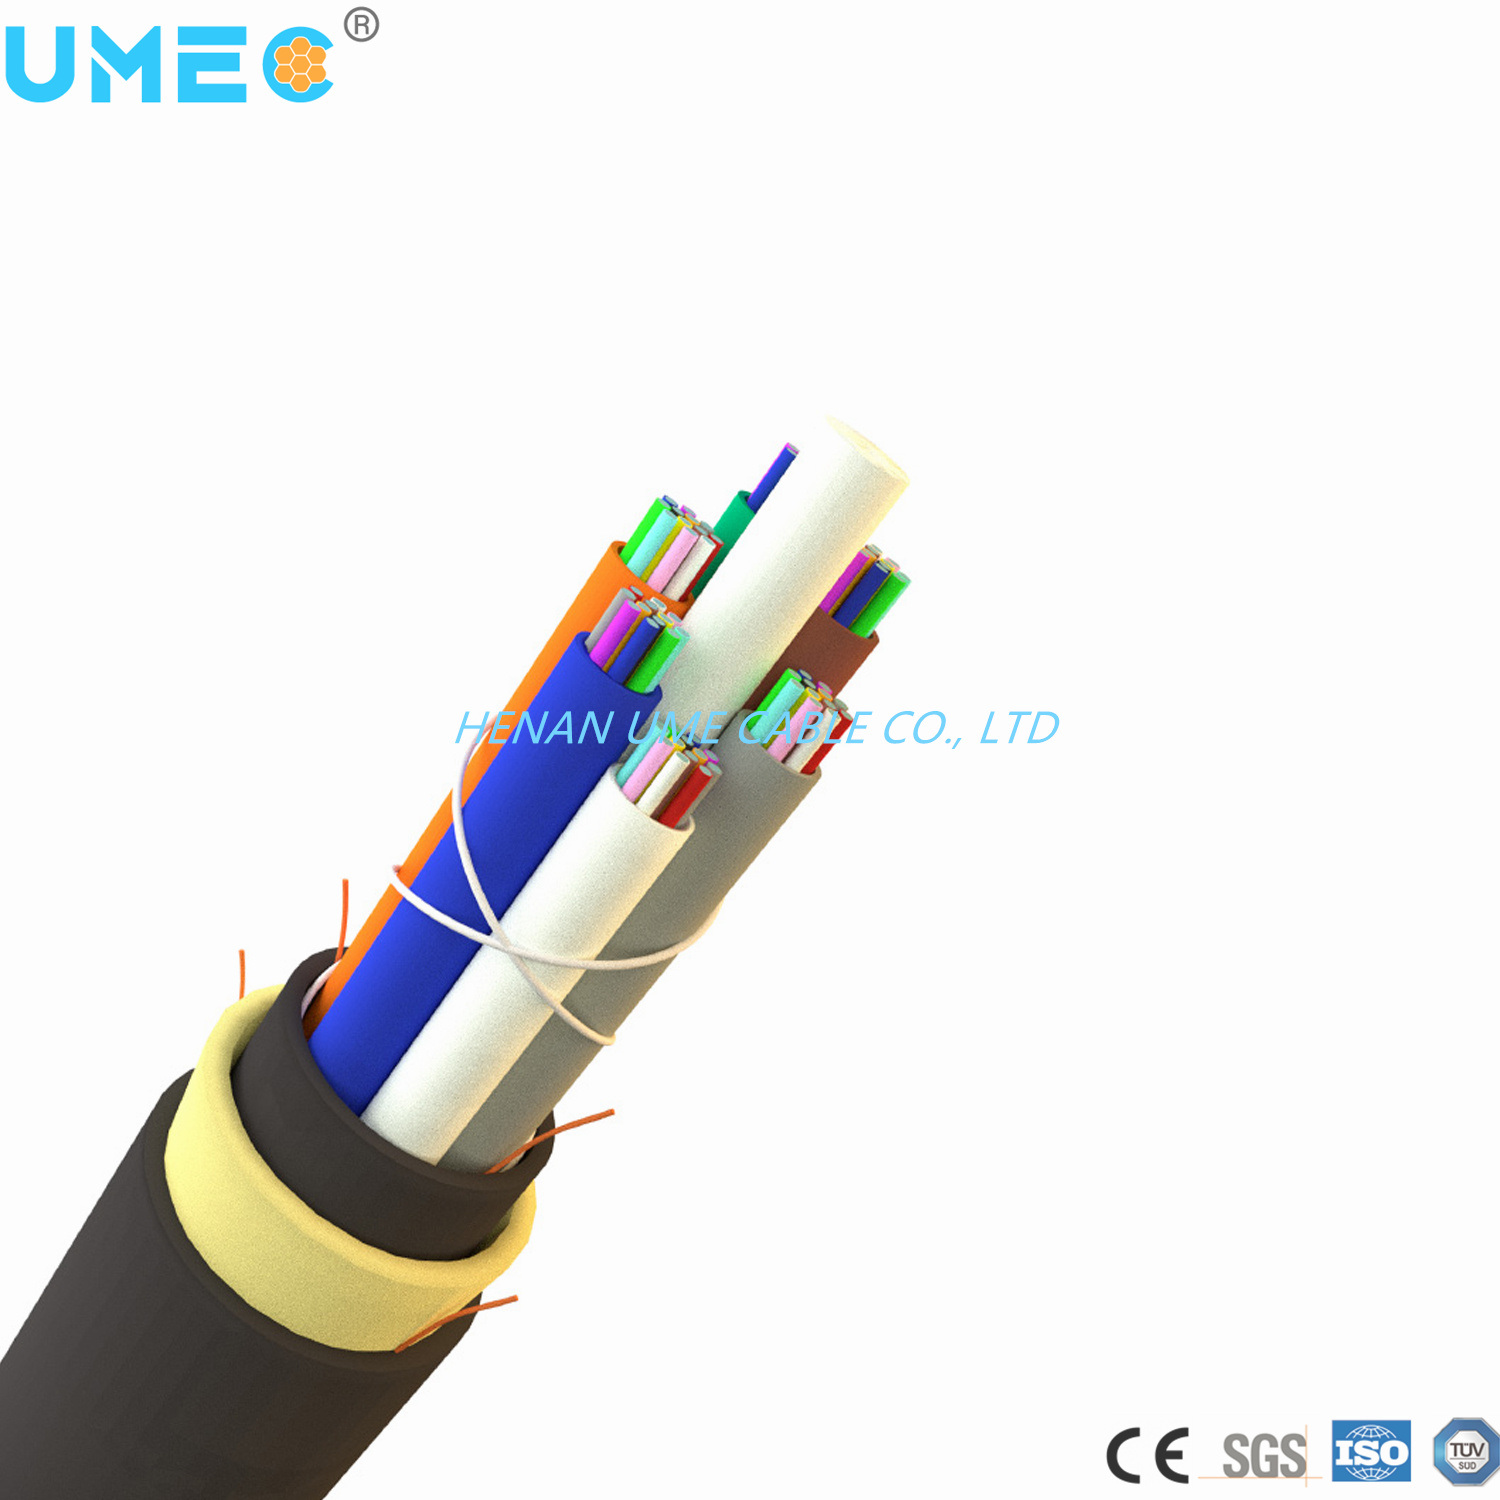 Transmission Fiber Optic Cable ADSS Cable